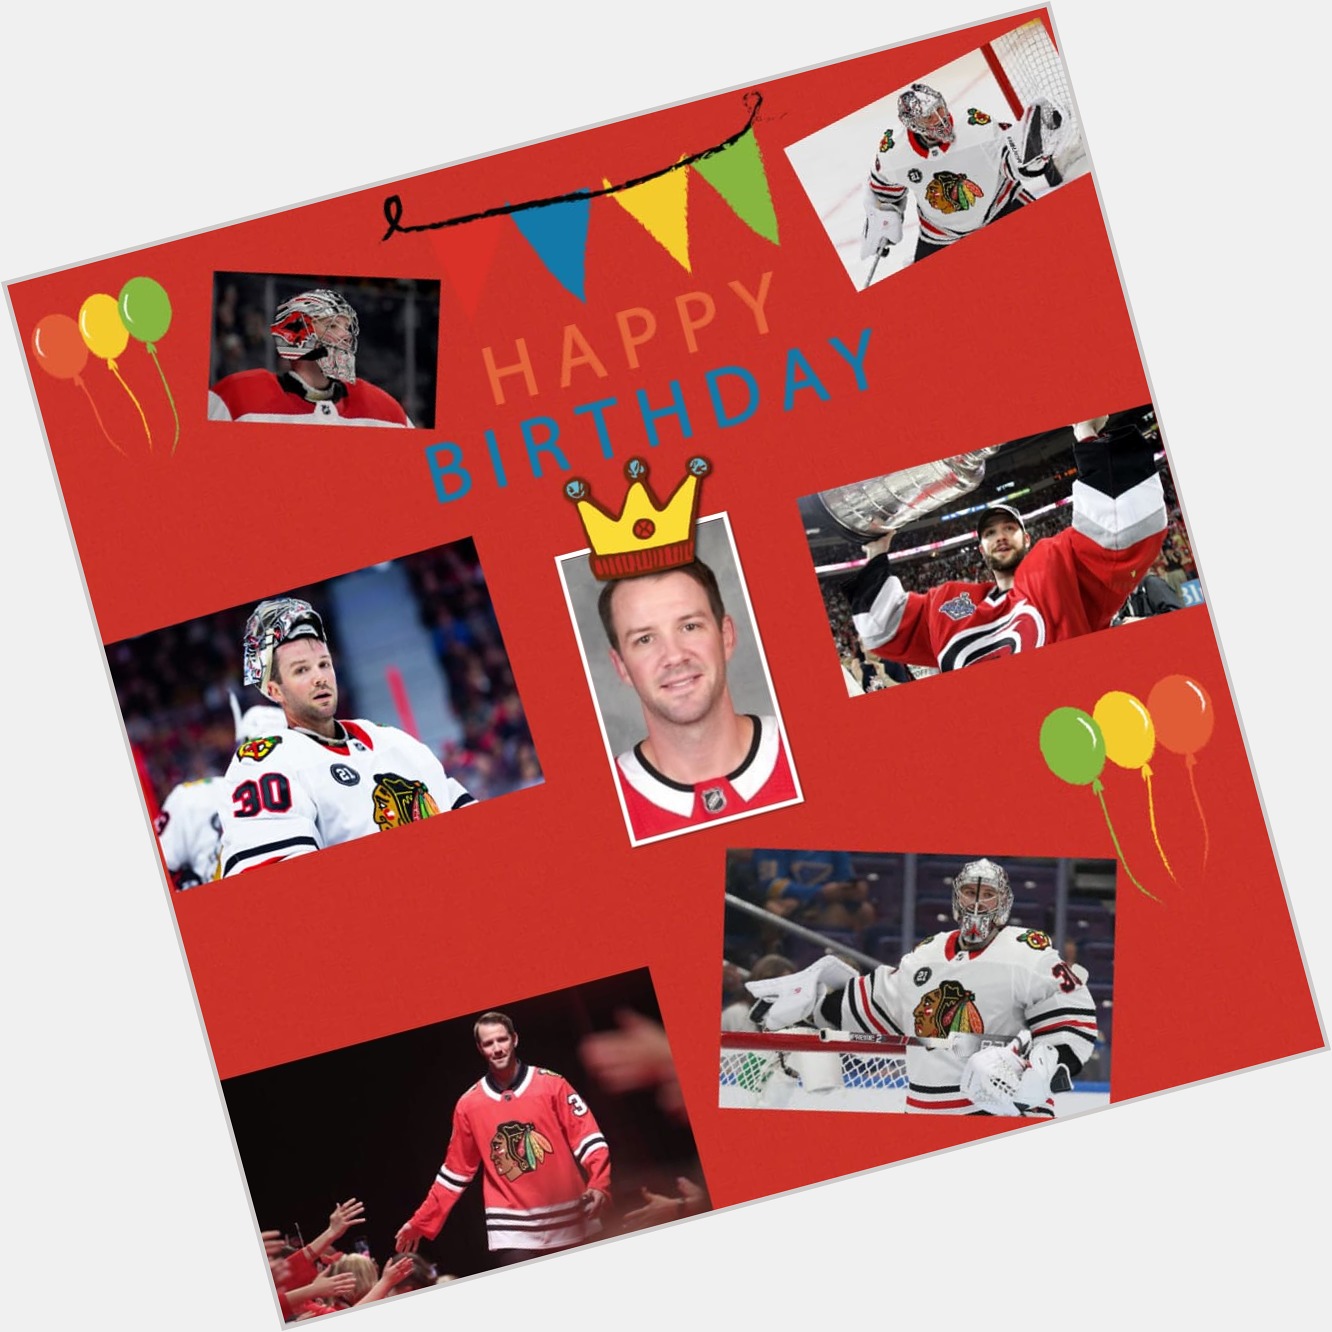 Wishing a happy birthday (well, almost birthday) to Cam Ward!    